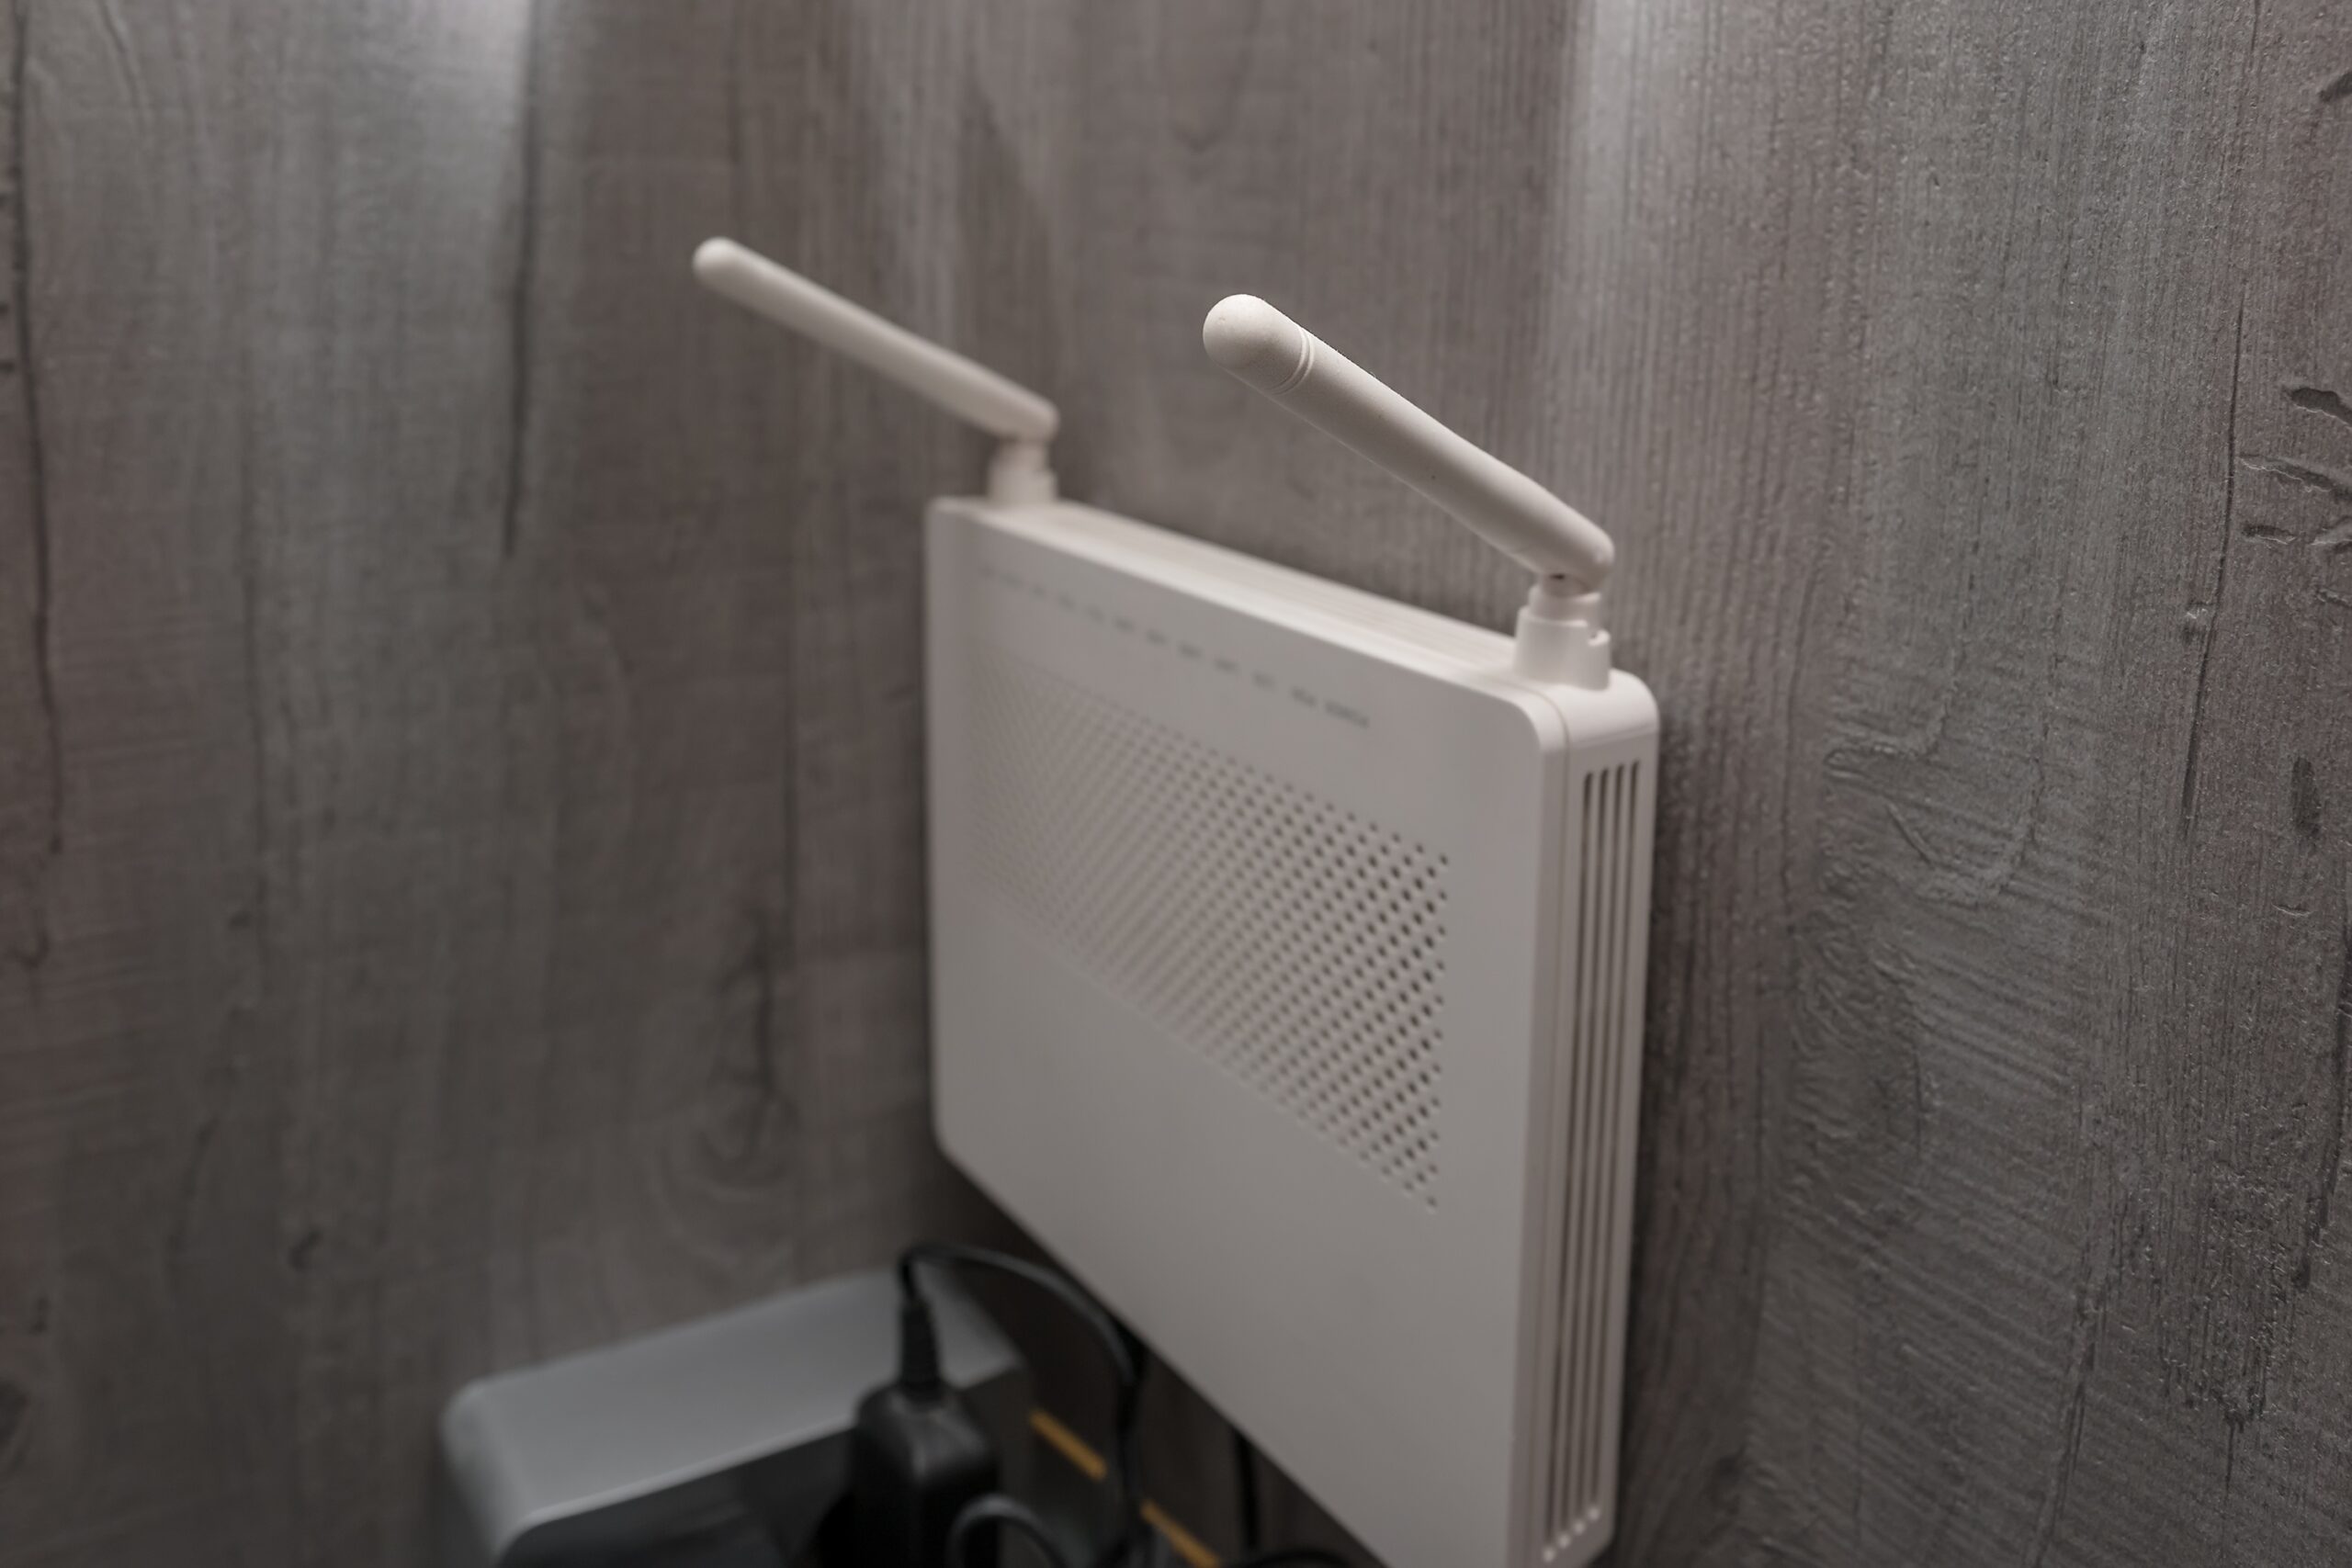 Plastic,Wifi,Router,With,Two,Antenna,Mounted,On,Wooden,Wall